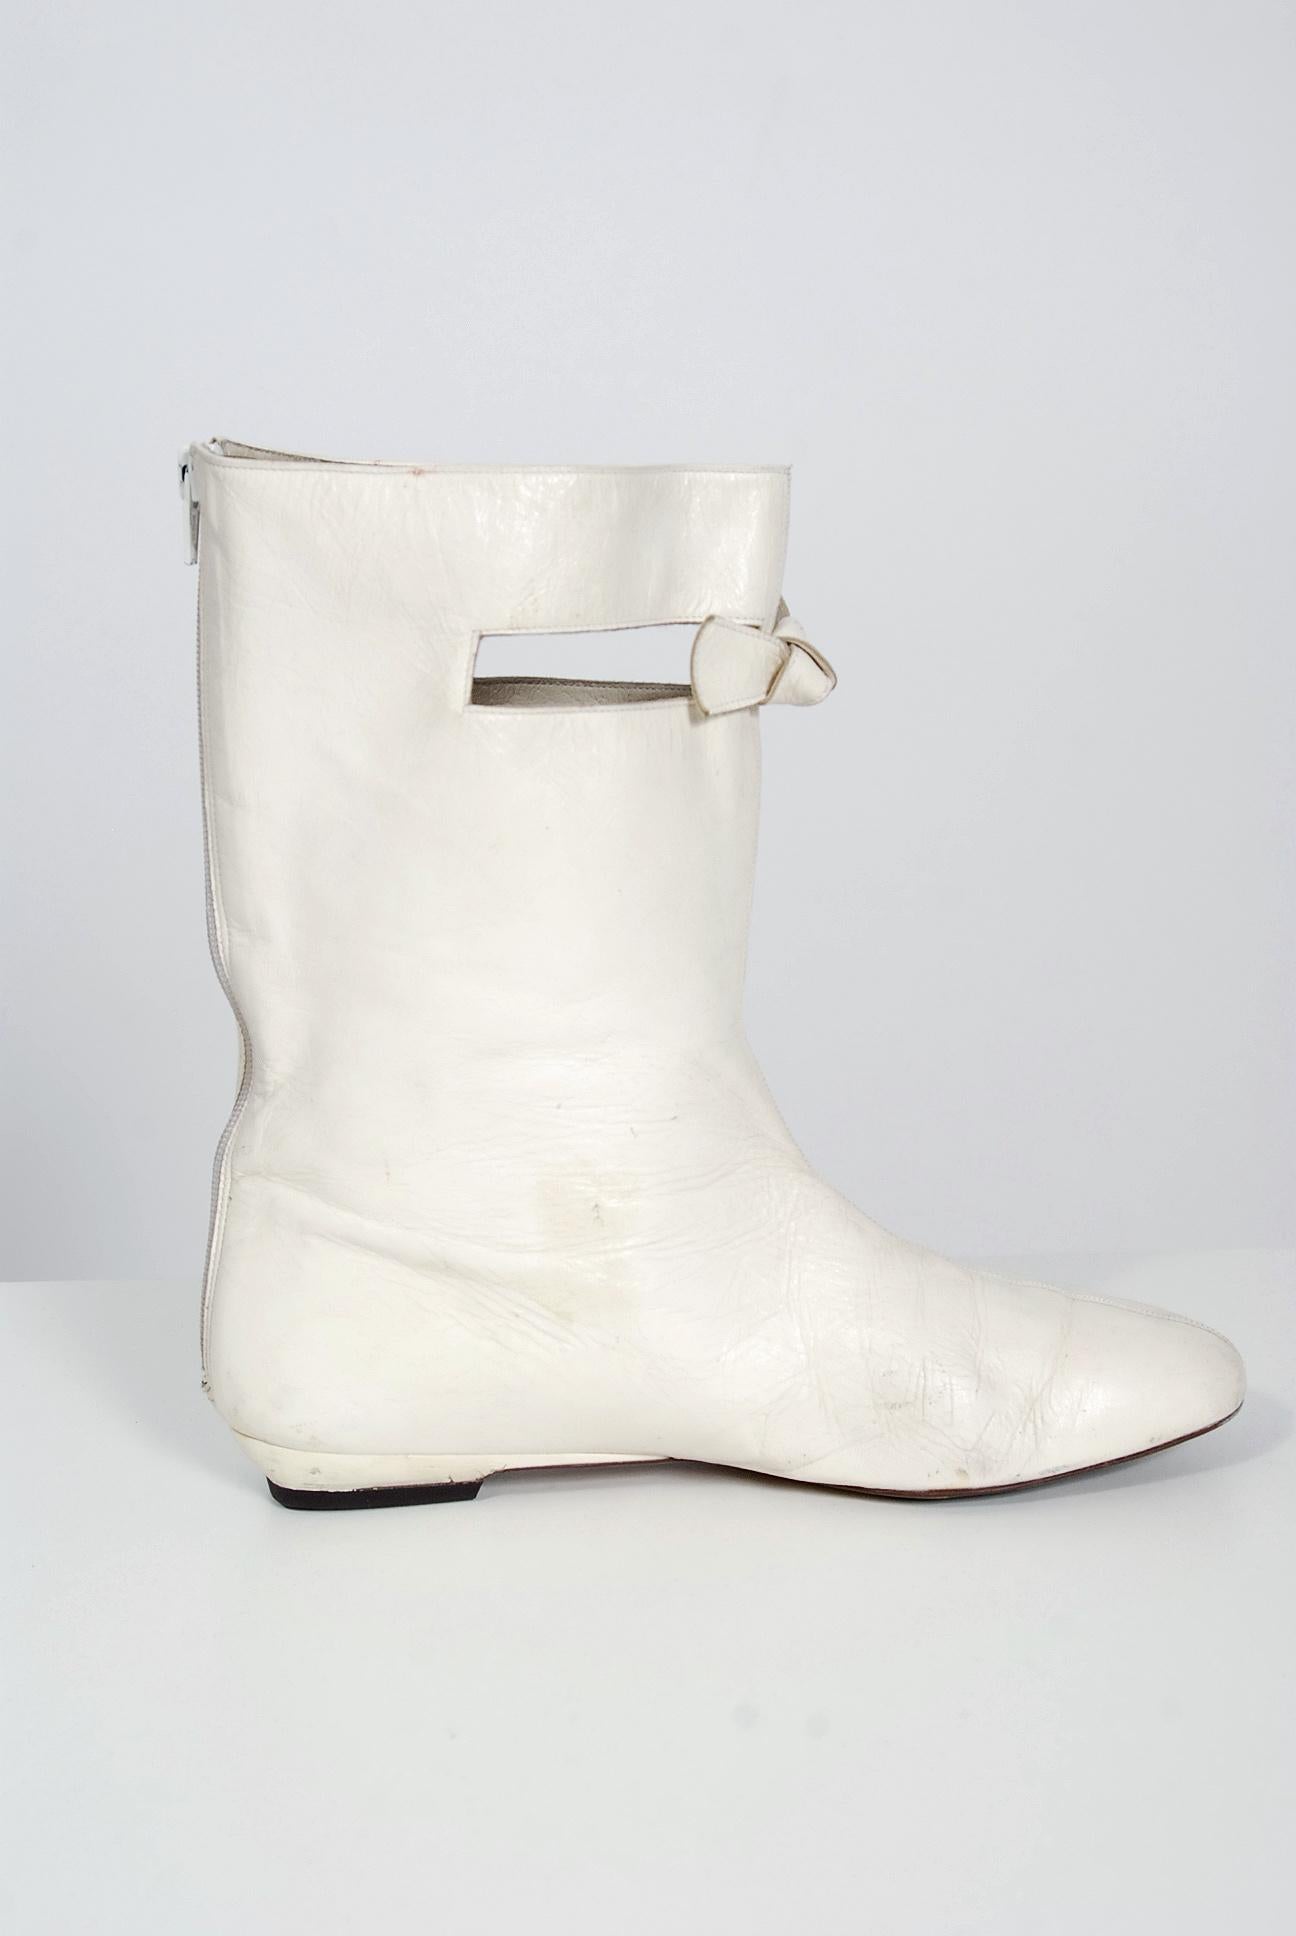 Courreges Couture White Leather Cut Out Mod Space Age Flat Go-Go Boots ...